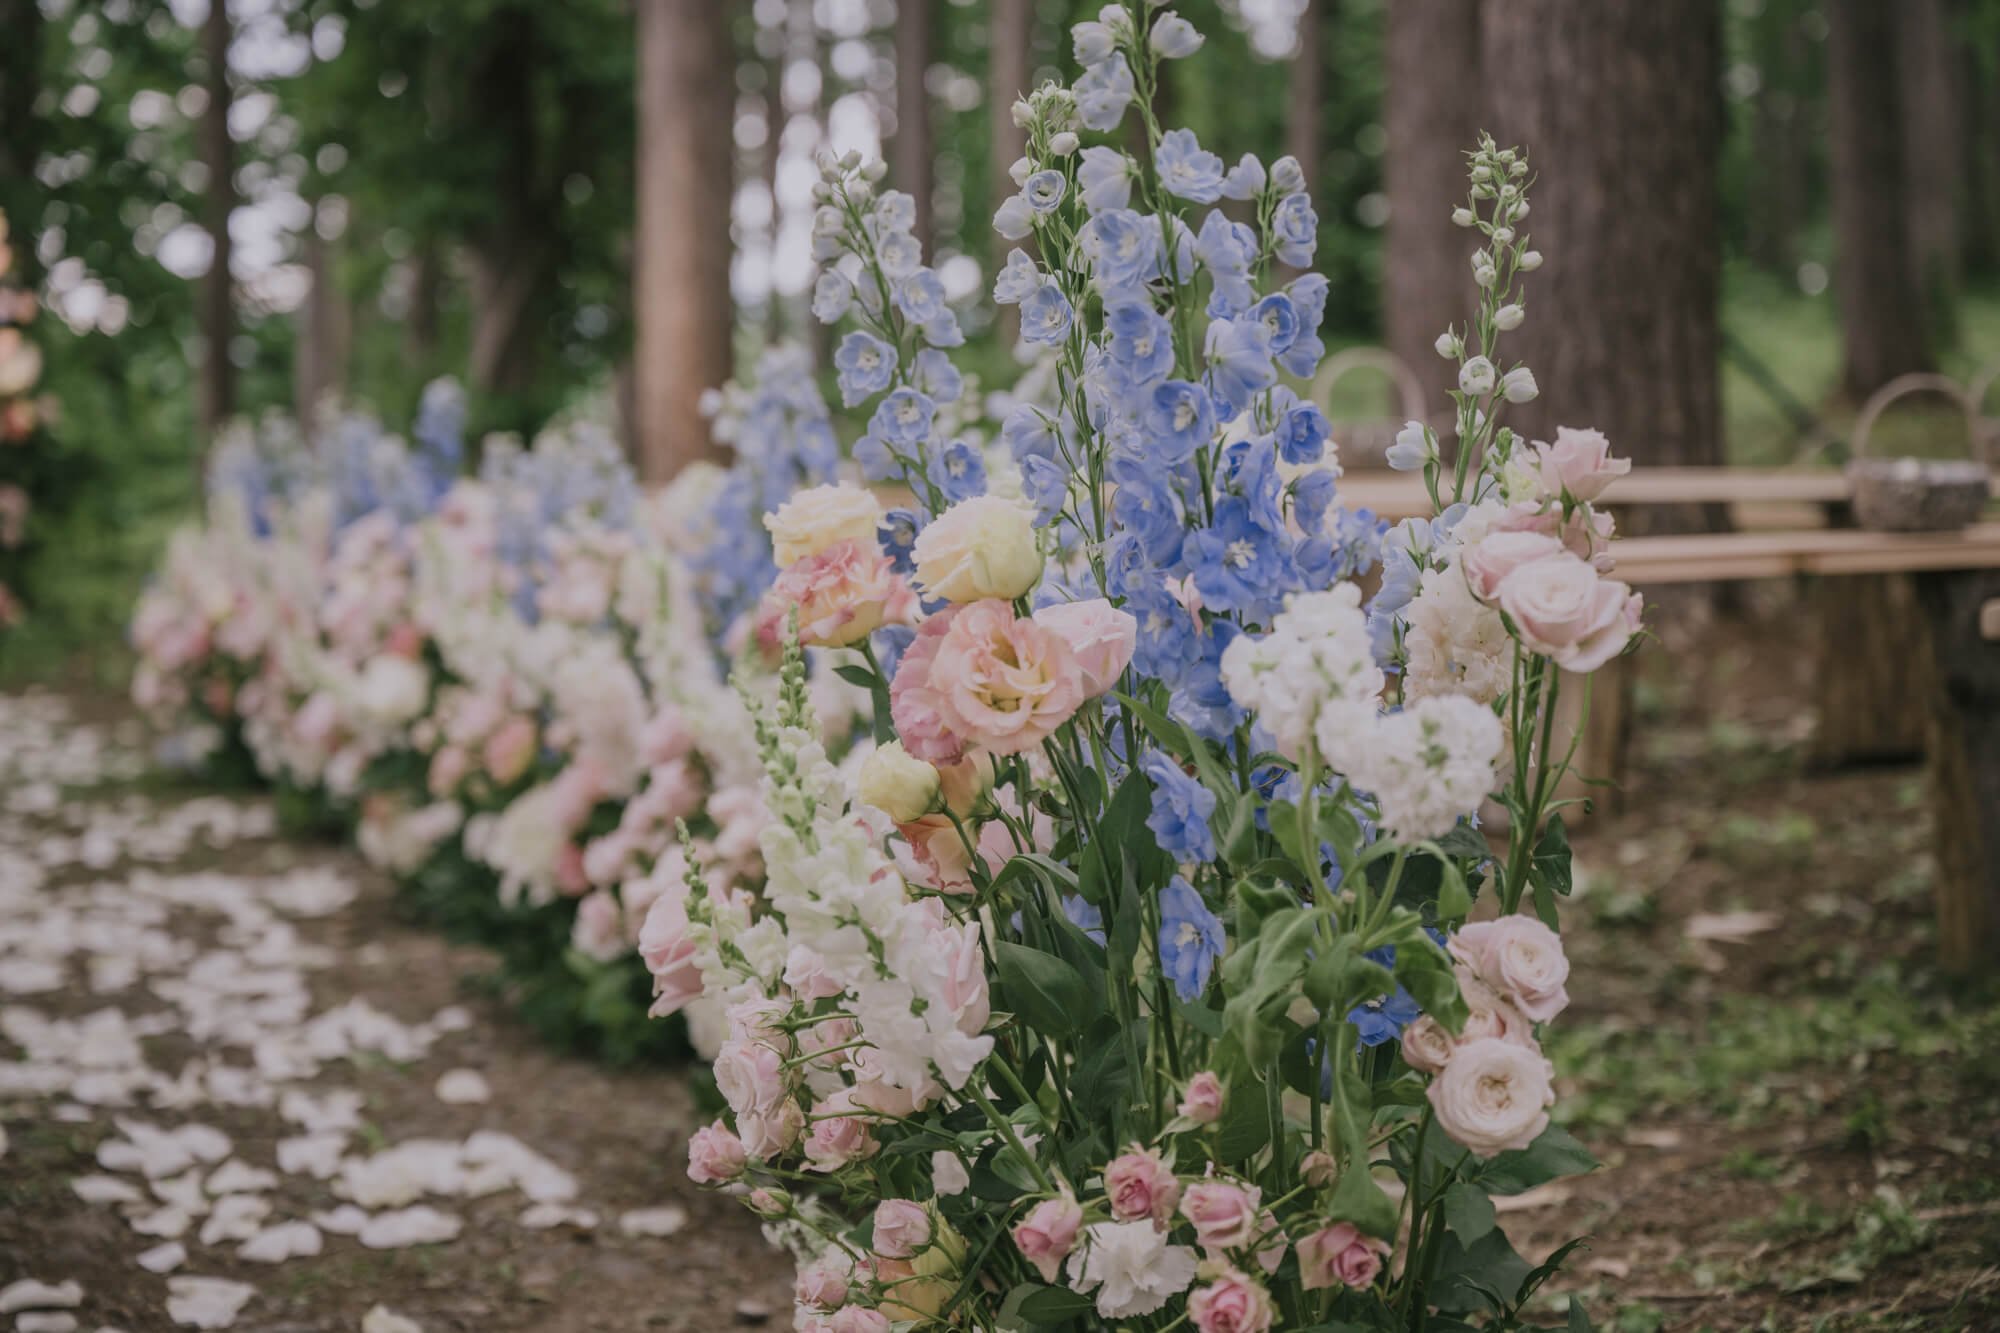 Tall pink and blue flowers lining wedding aisle